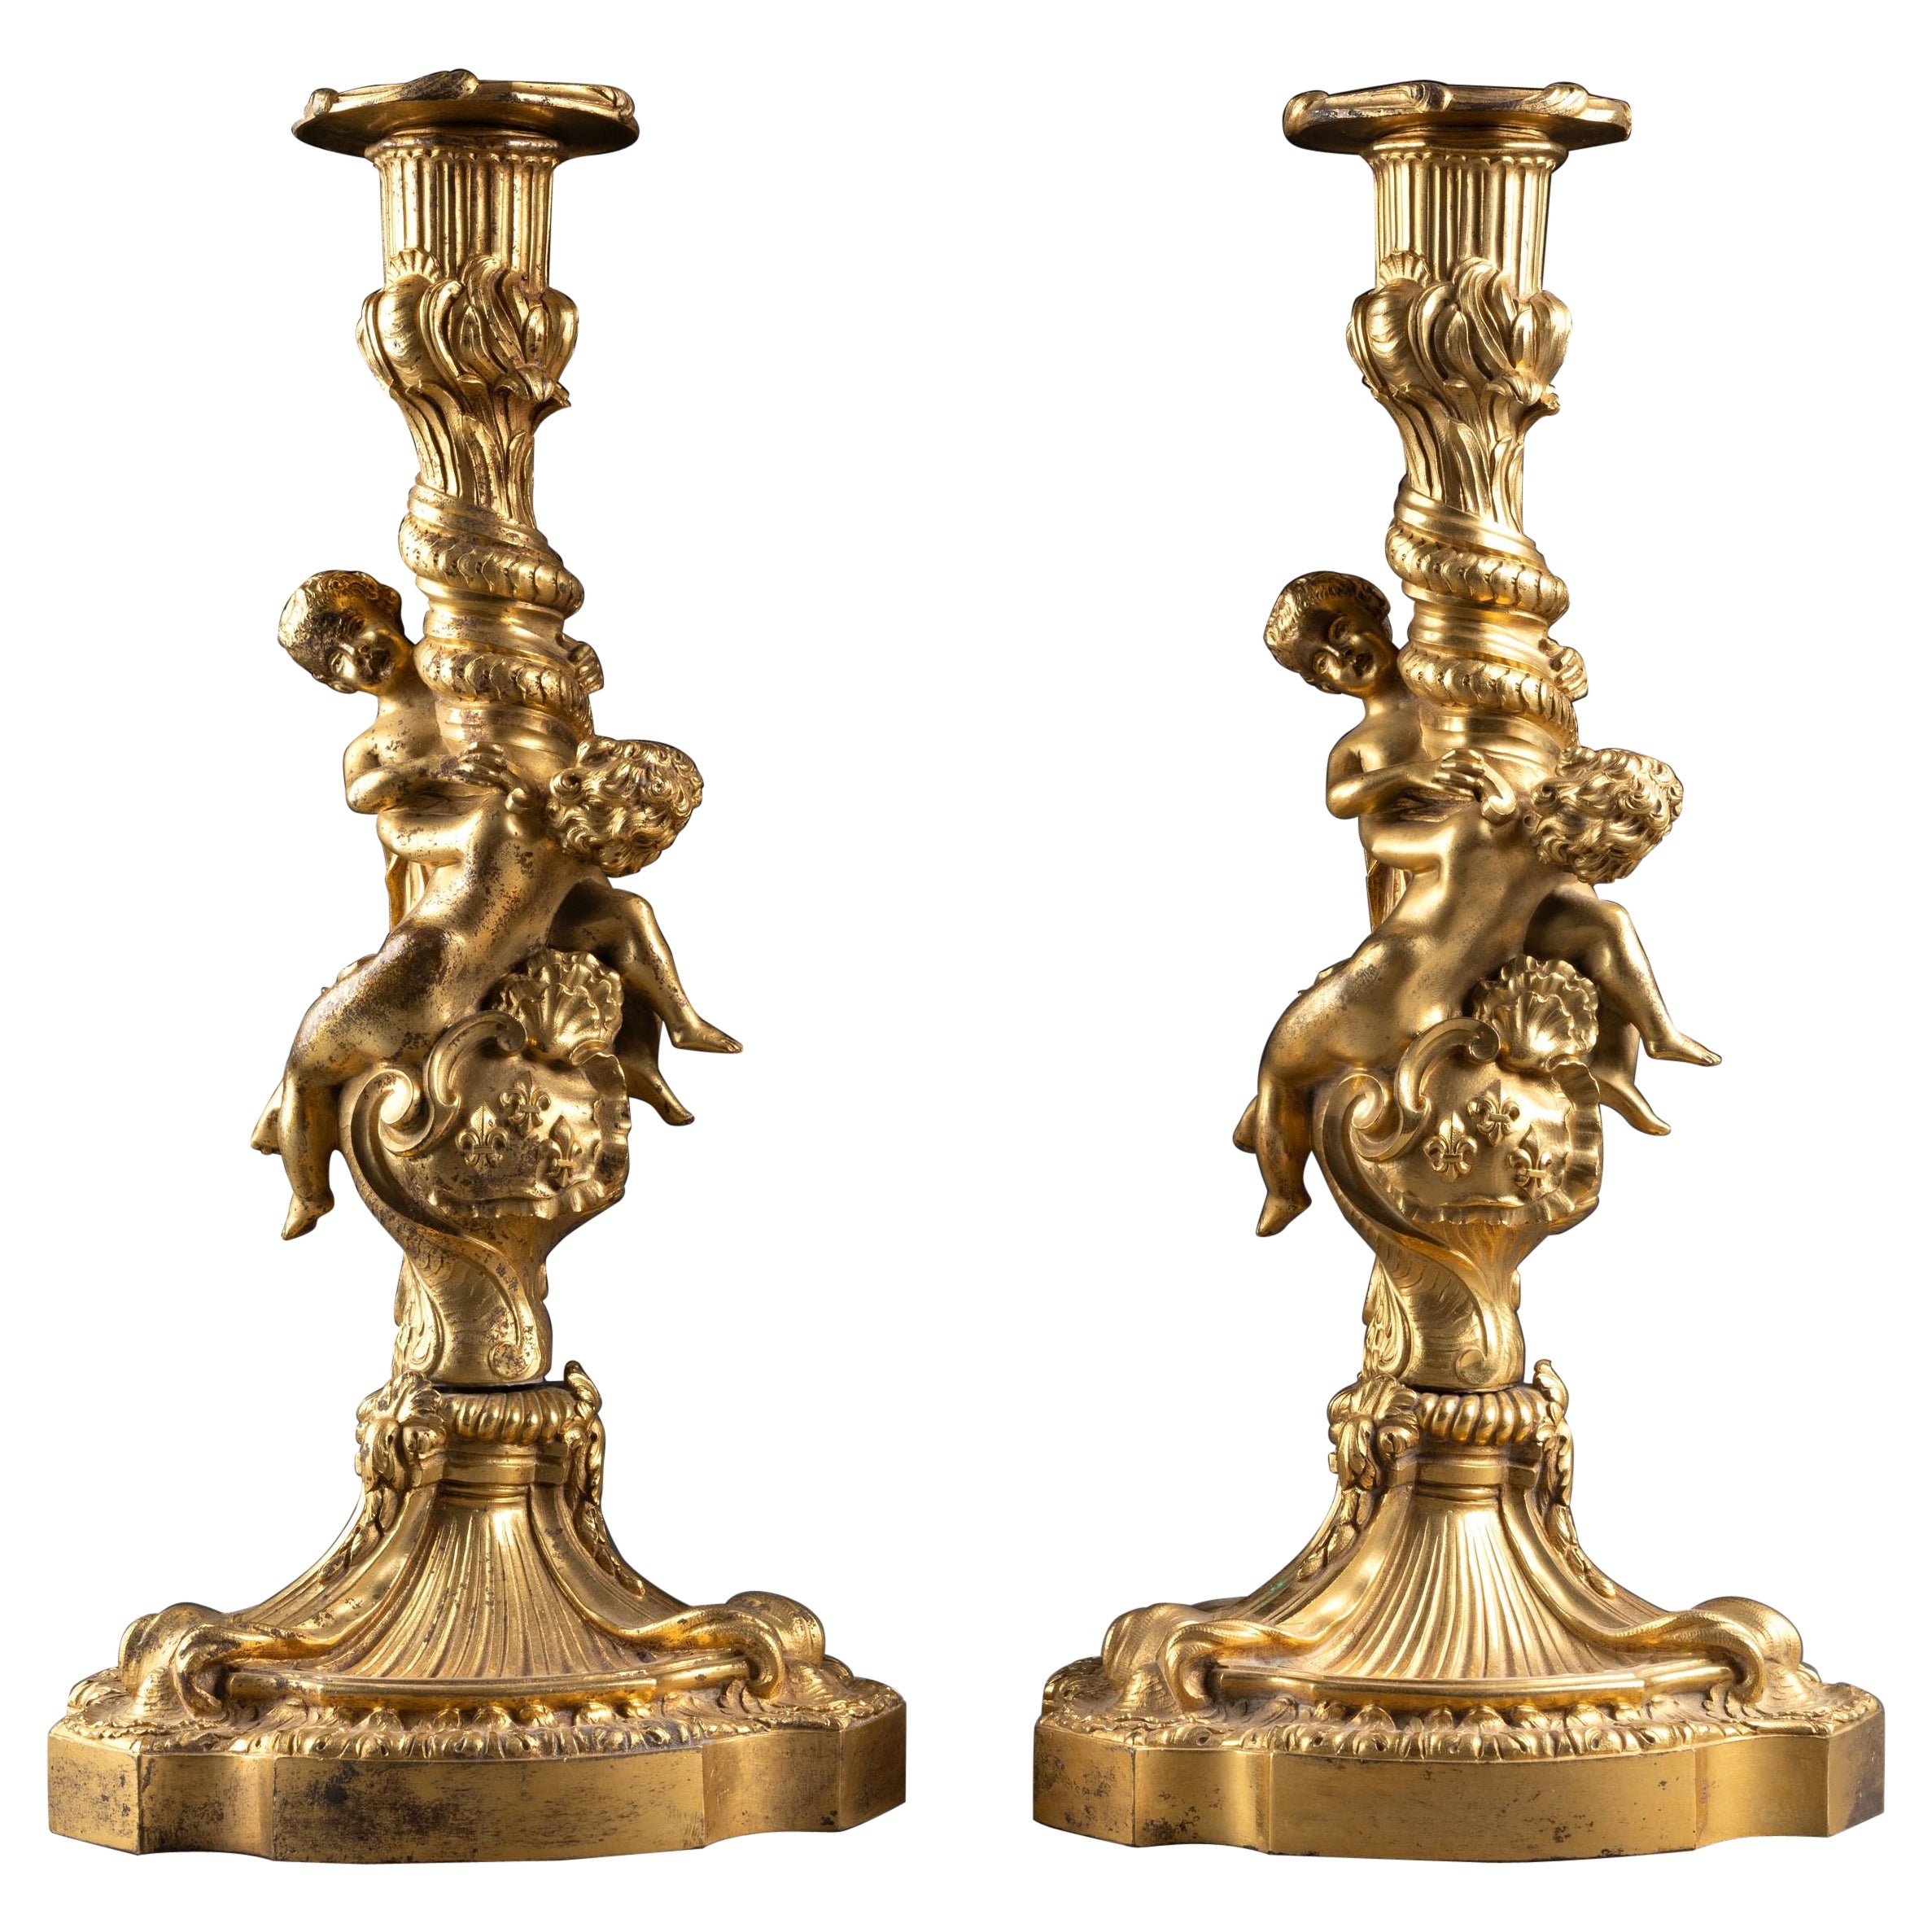 19th C. Pair of Louis XV Gilt Bronze Candlesticks with French Royal Coat of Arms